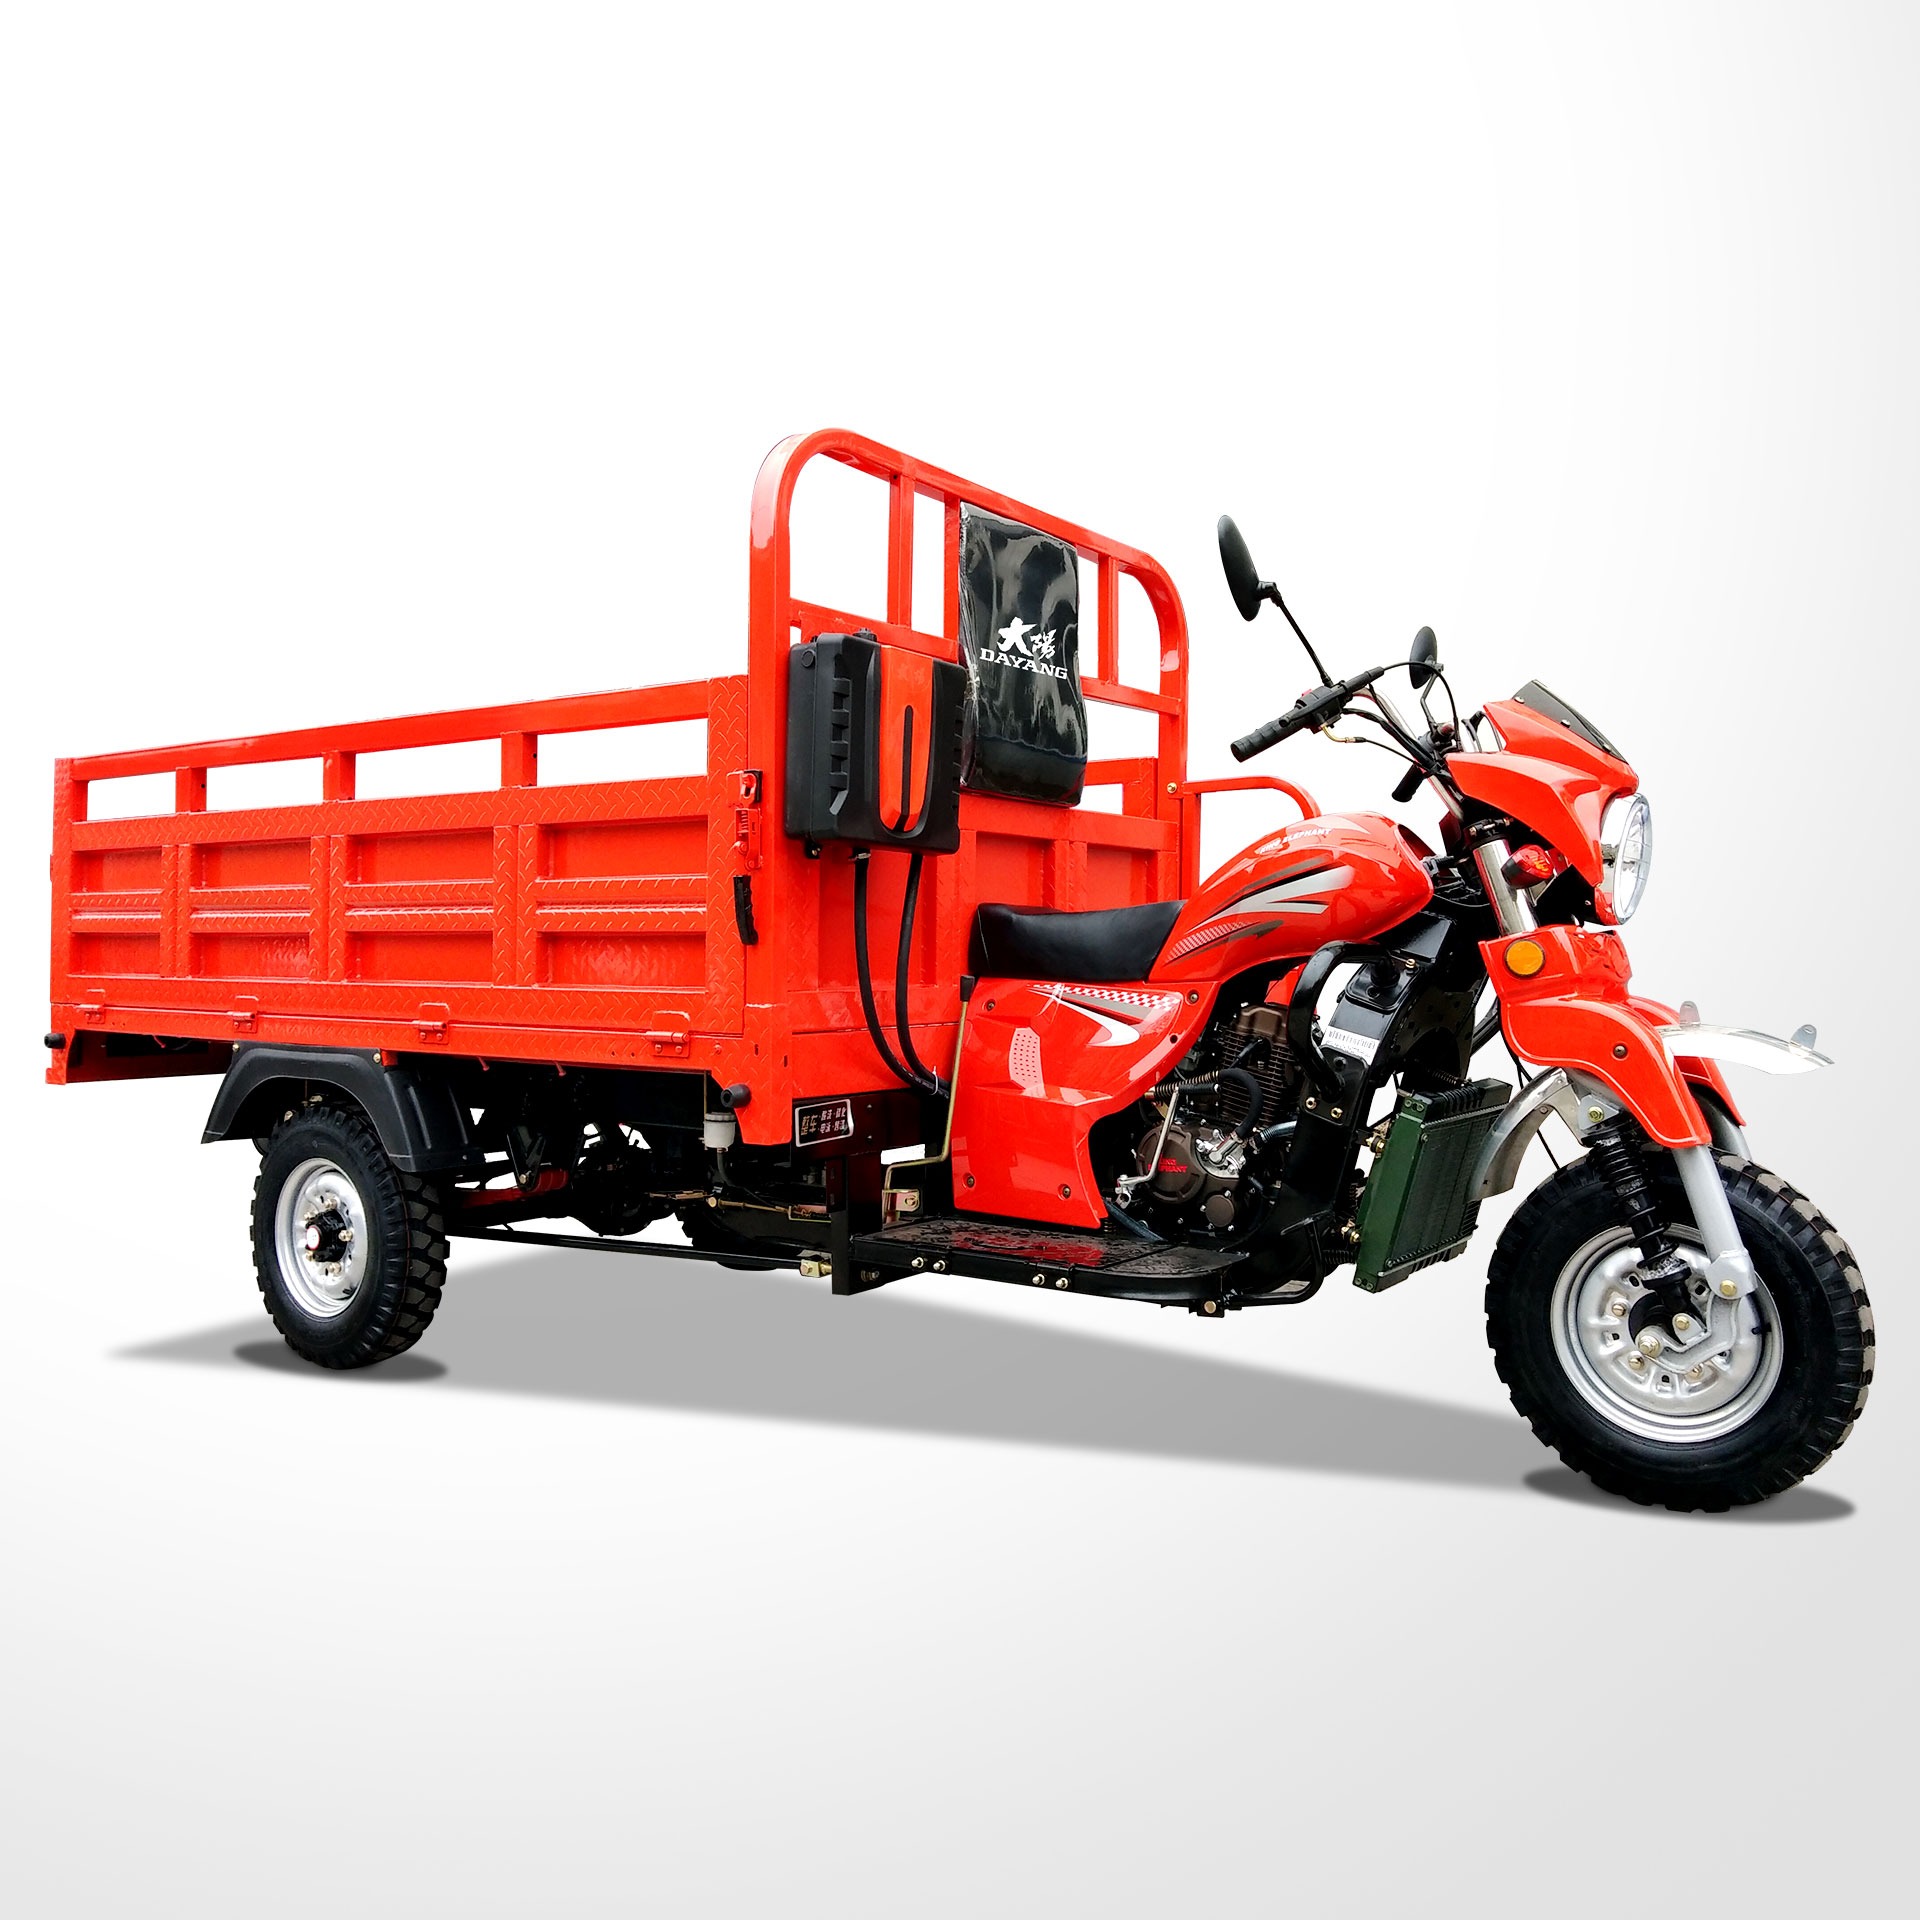 DY-M2 hot selling three wheel motorcycle model at Myanmar with powerful engine of 150cc and 200cc heavy loading cargo tricycle